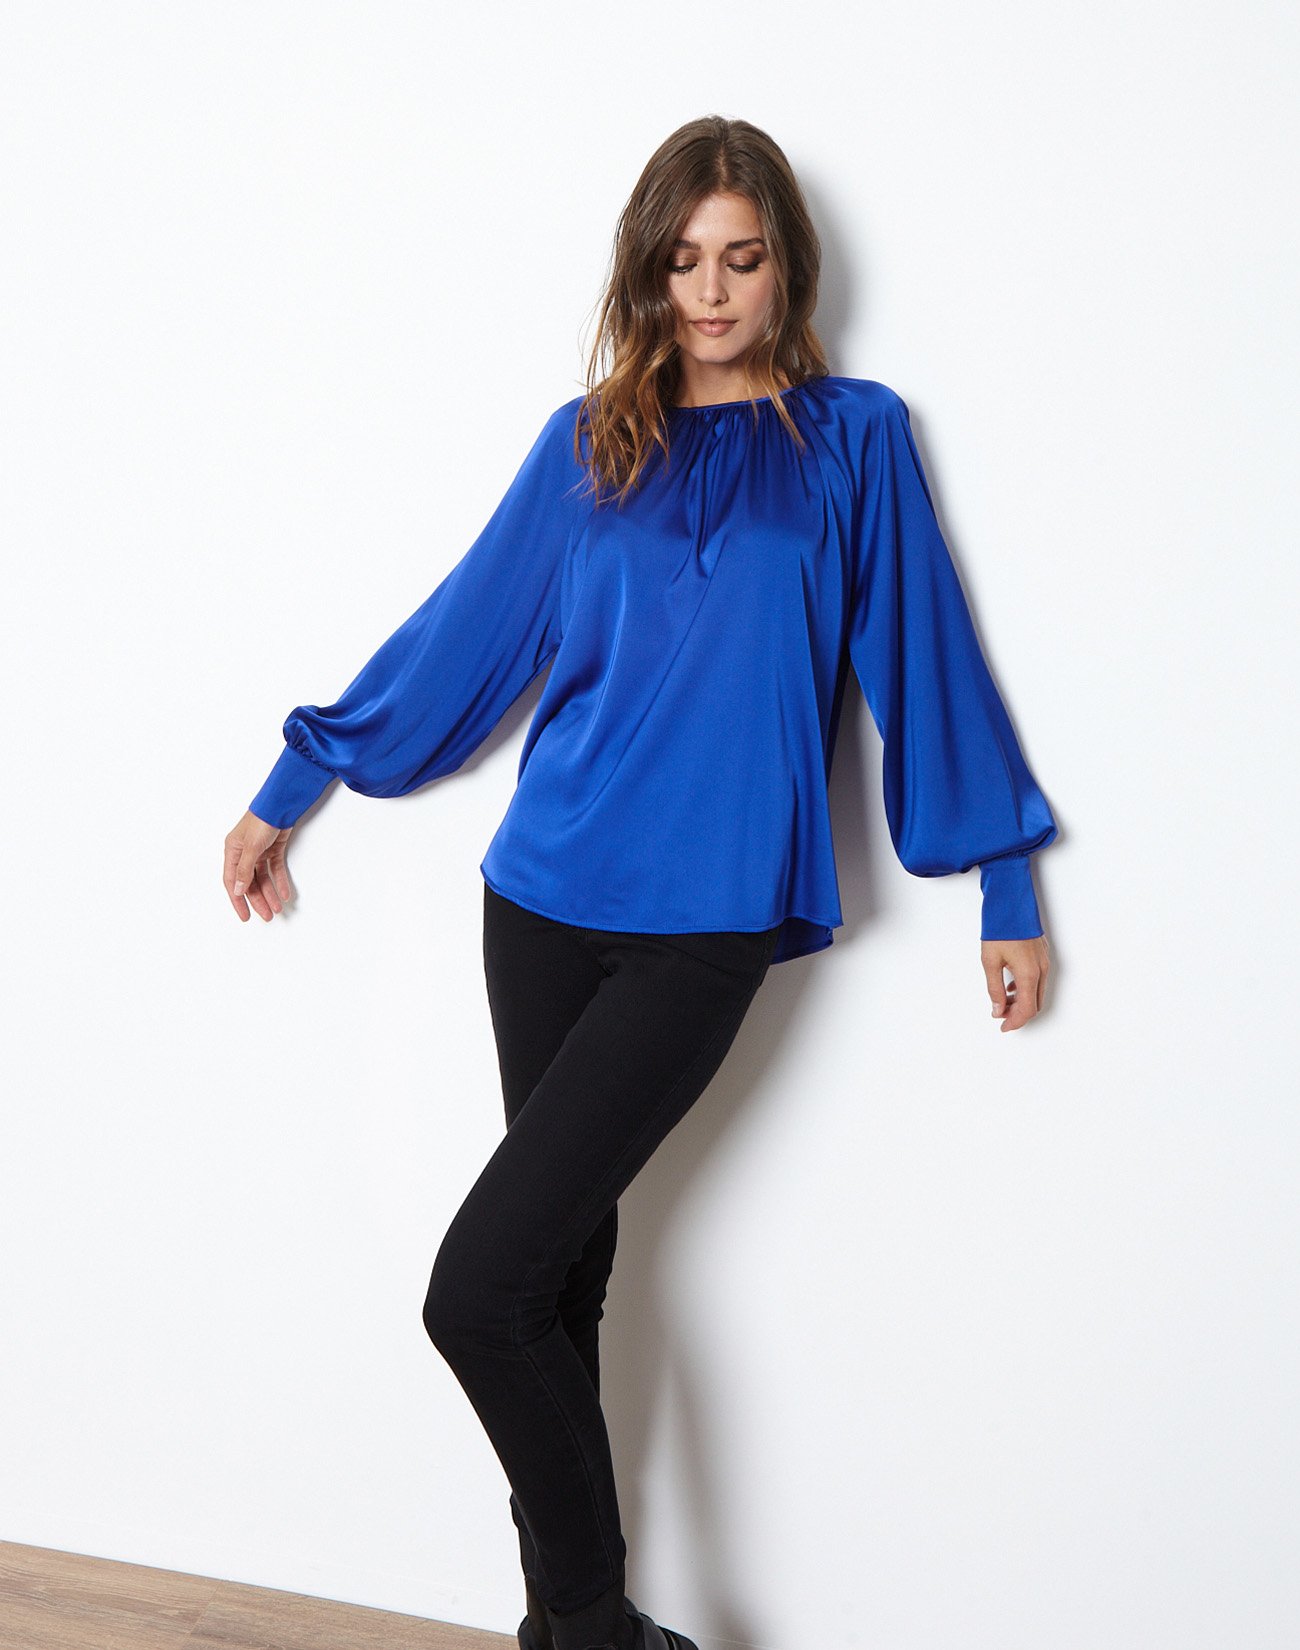 Satin top with pleating detail